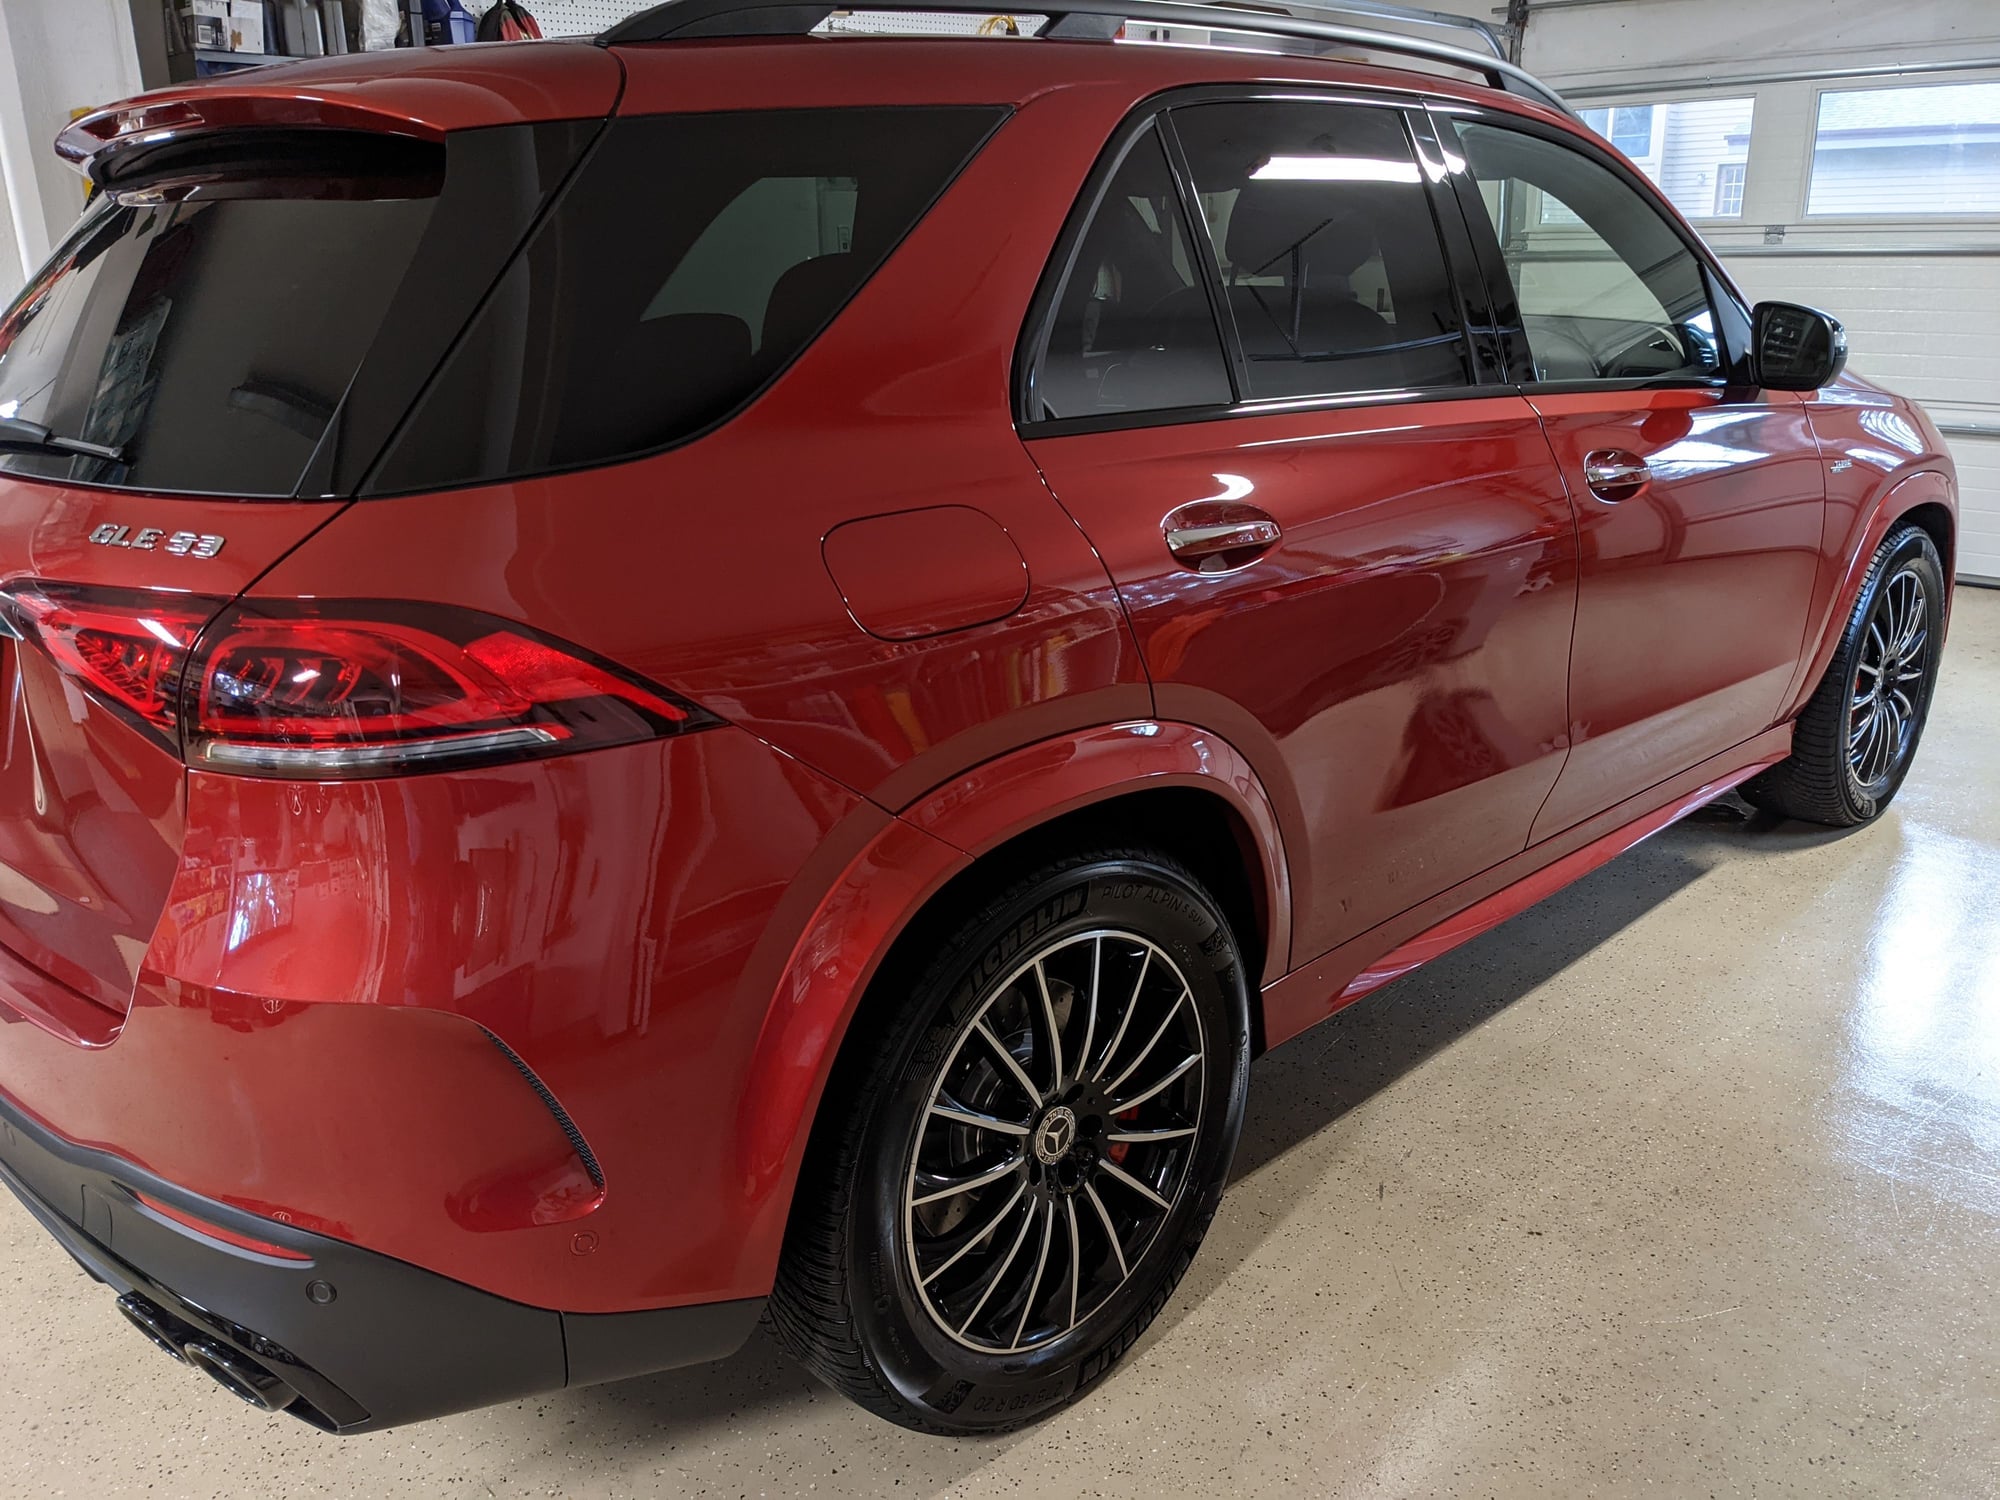 2021 Mercedes-Benz GLE-Class - Primo 2021 AMG GLE 53, Cardinal Red with Night Pkg - Used - VIN 4JGFB6BB3MA360722 - 6 cyl - AWD - Automatic - SUV - Red - Boise, ID 83704, United States